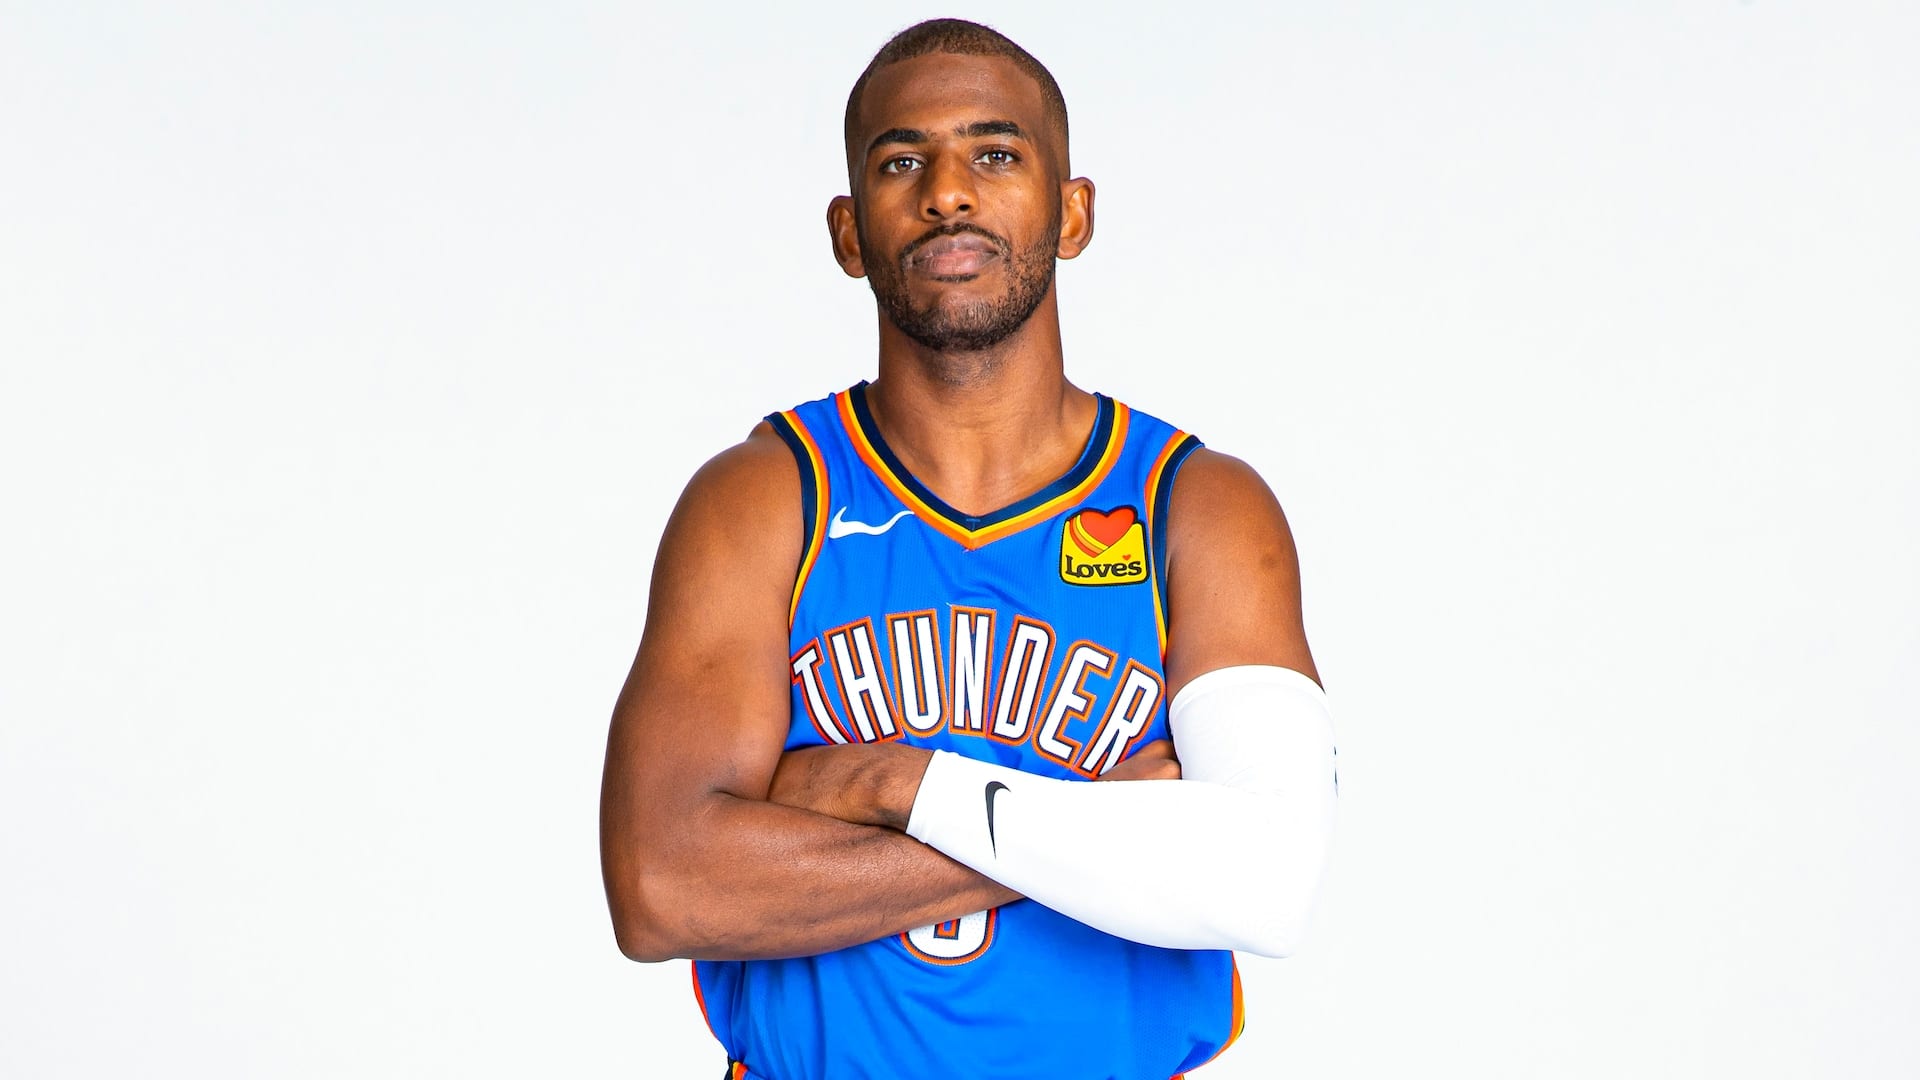 Chris Paul Says NBA Return Complicated But Players Eager To Play